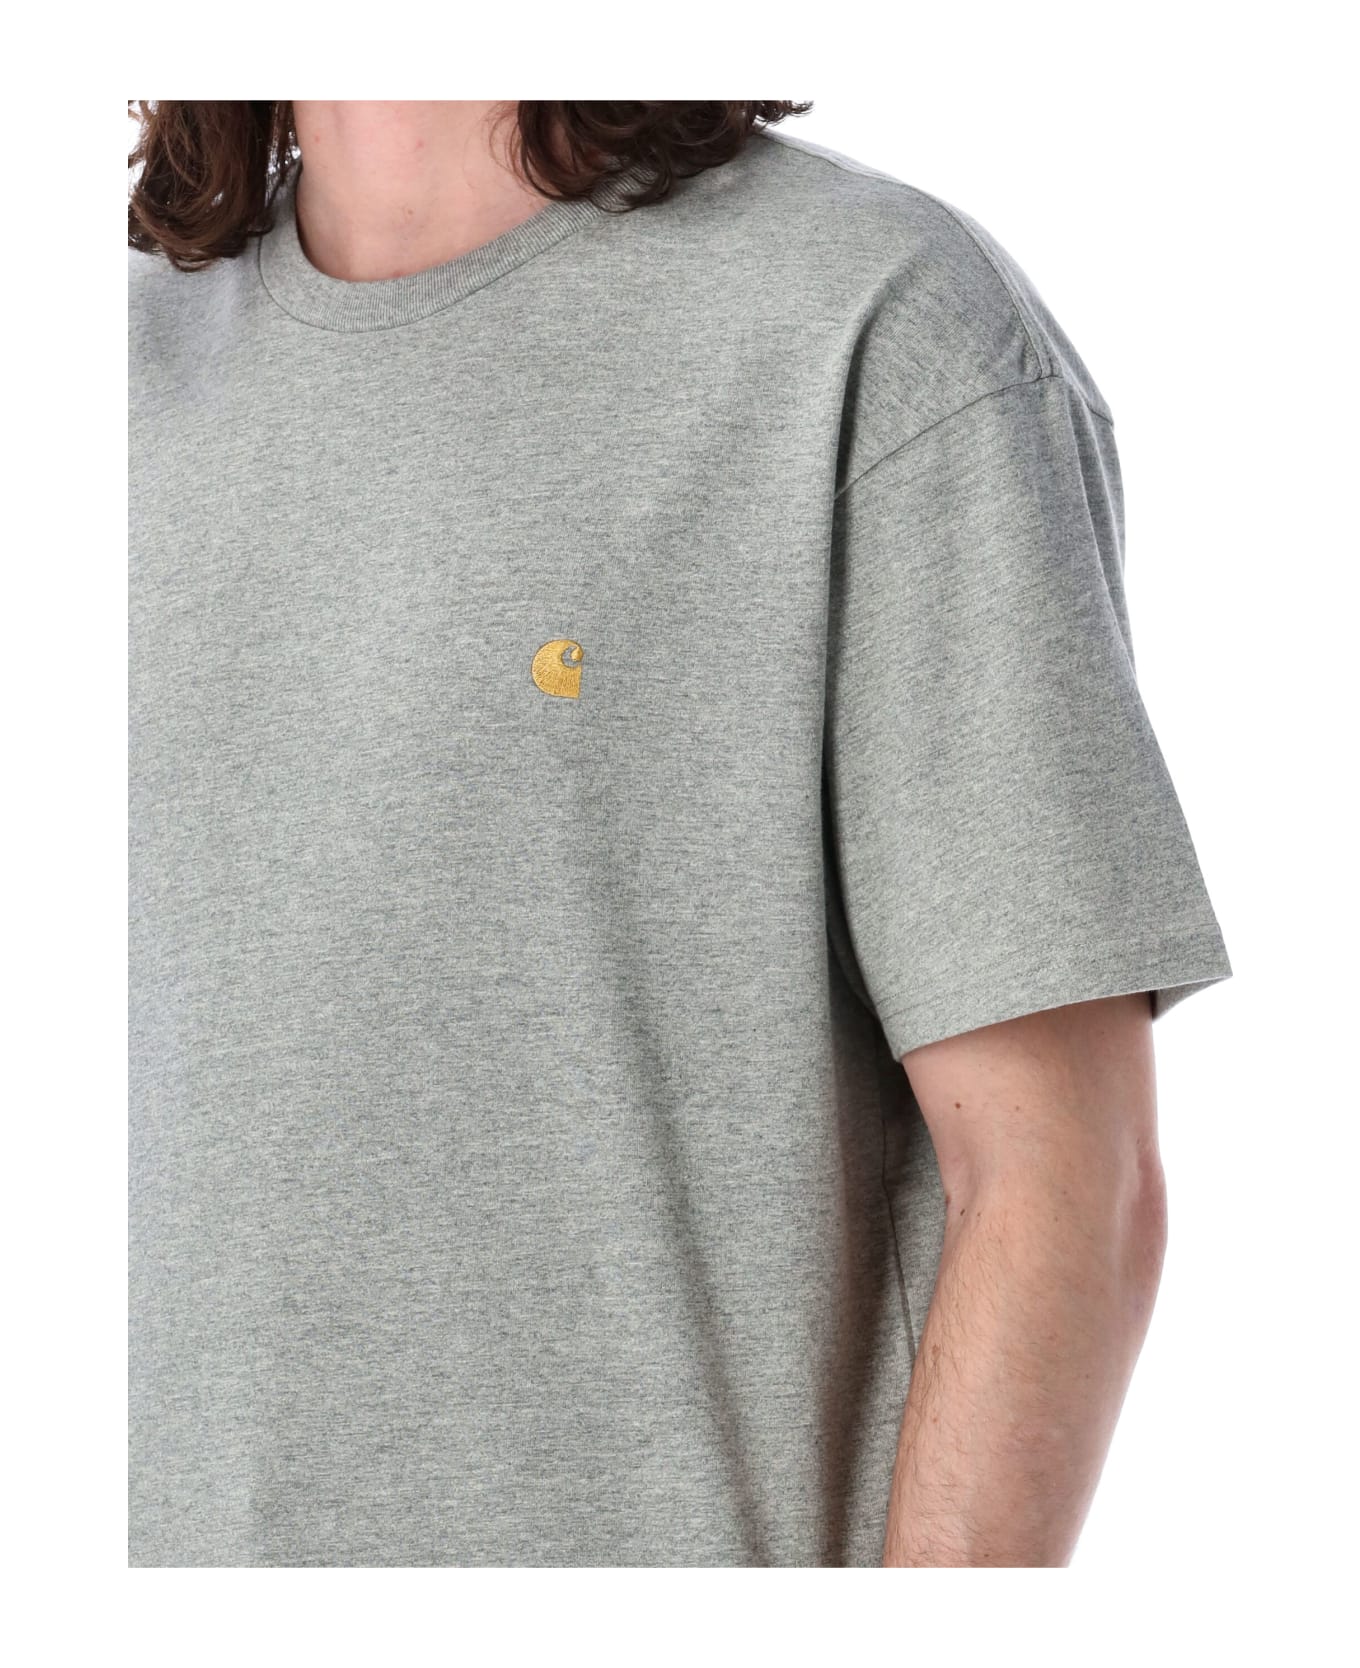 Carhartt Chase S/s T-shirt - GREY HEATHER